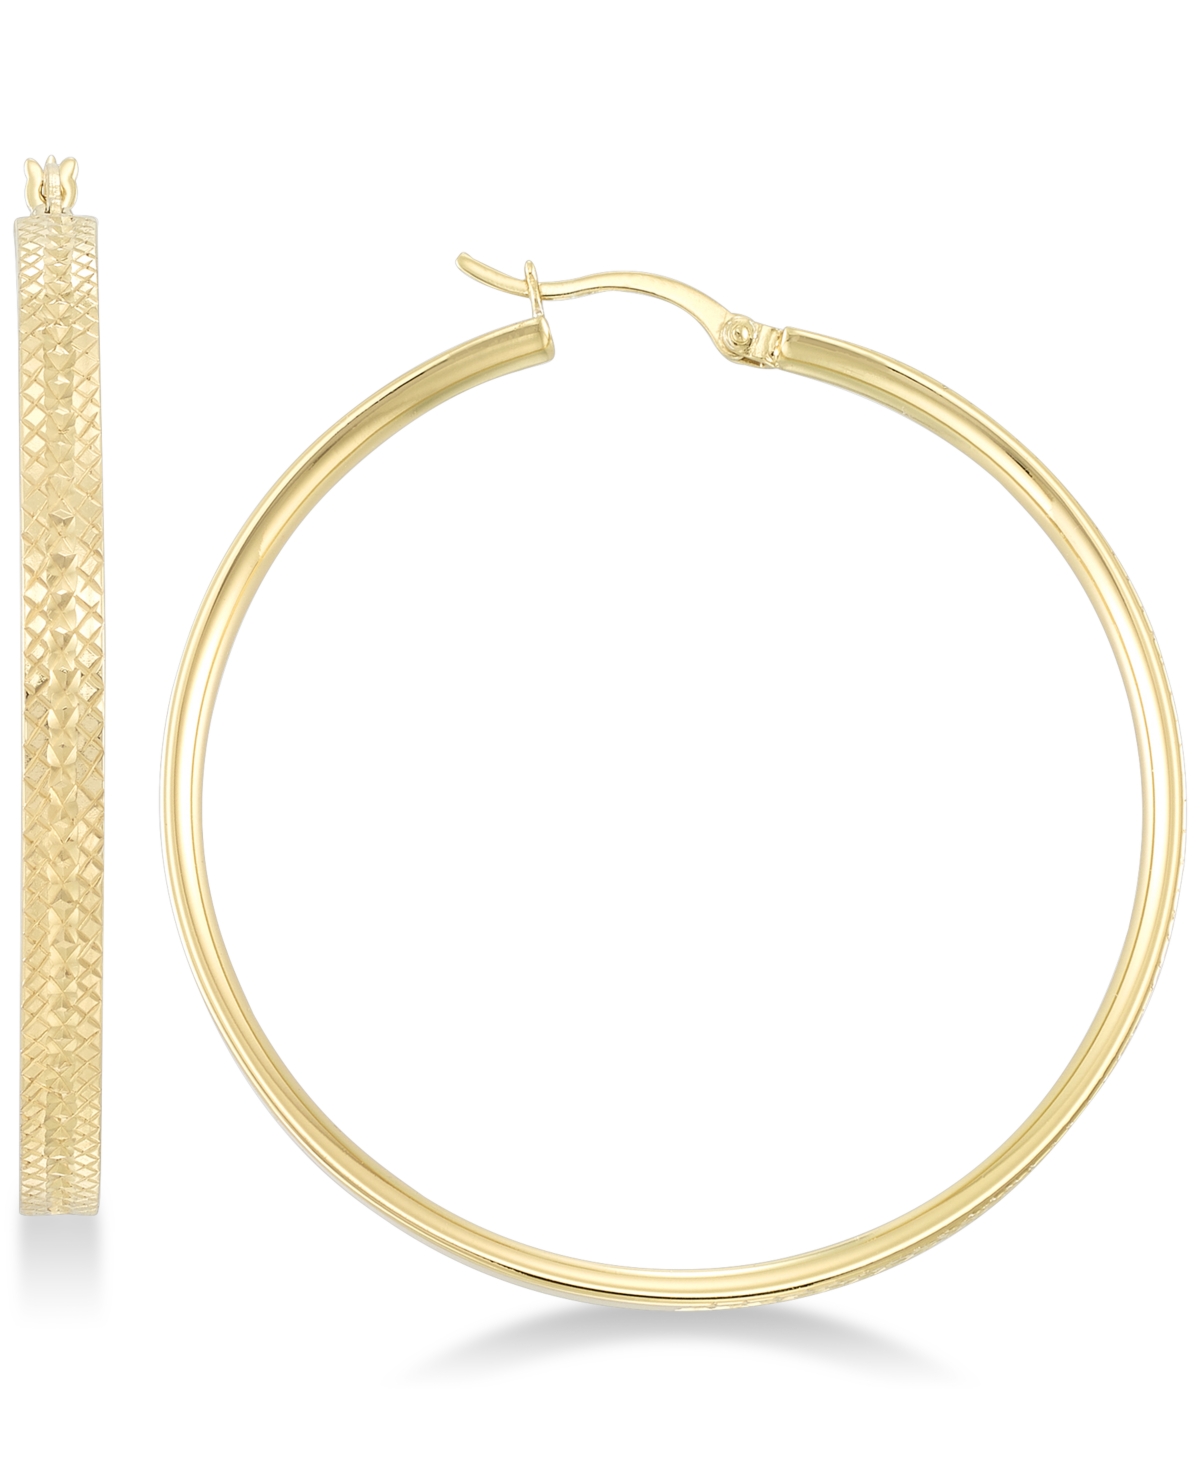 Textured Hoop Earrings in 18k Gold over Sterling Silver - k Gold Over Silver